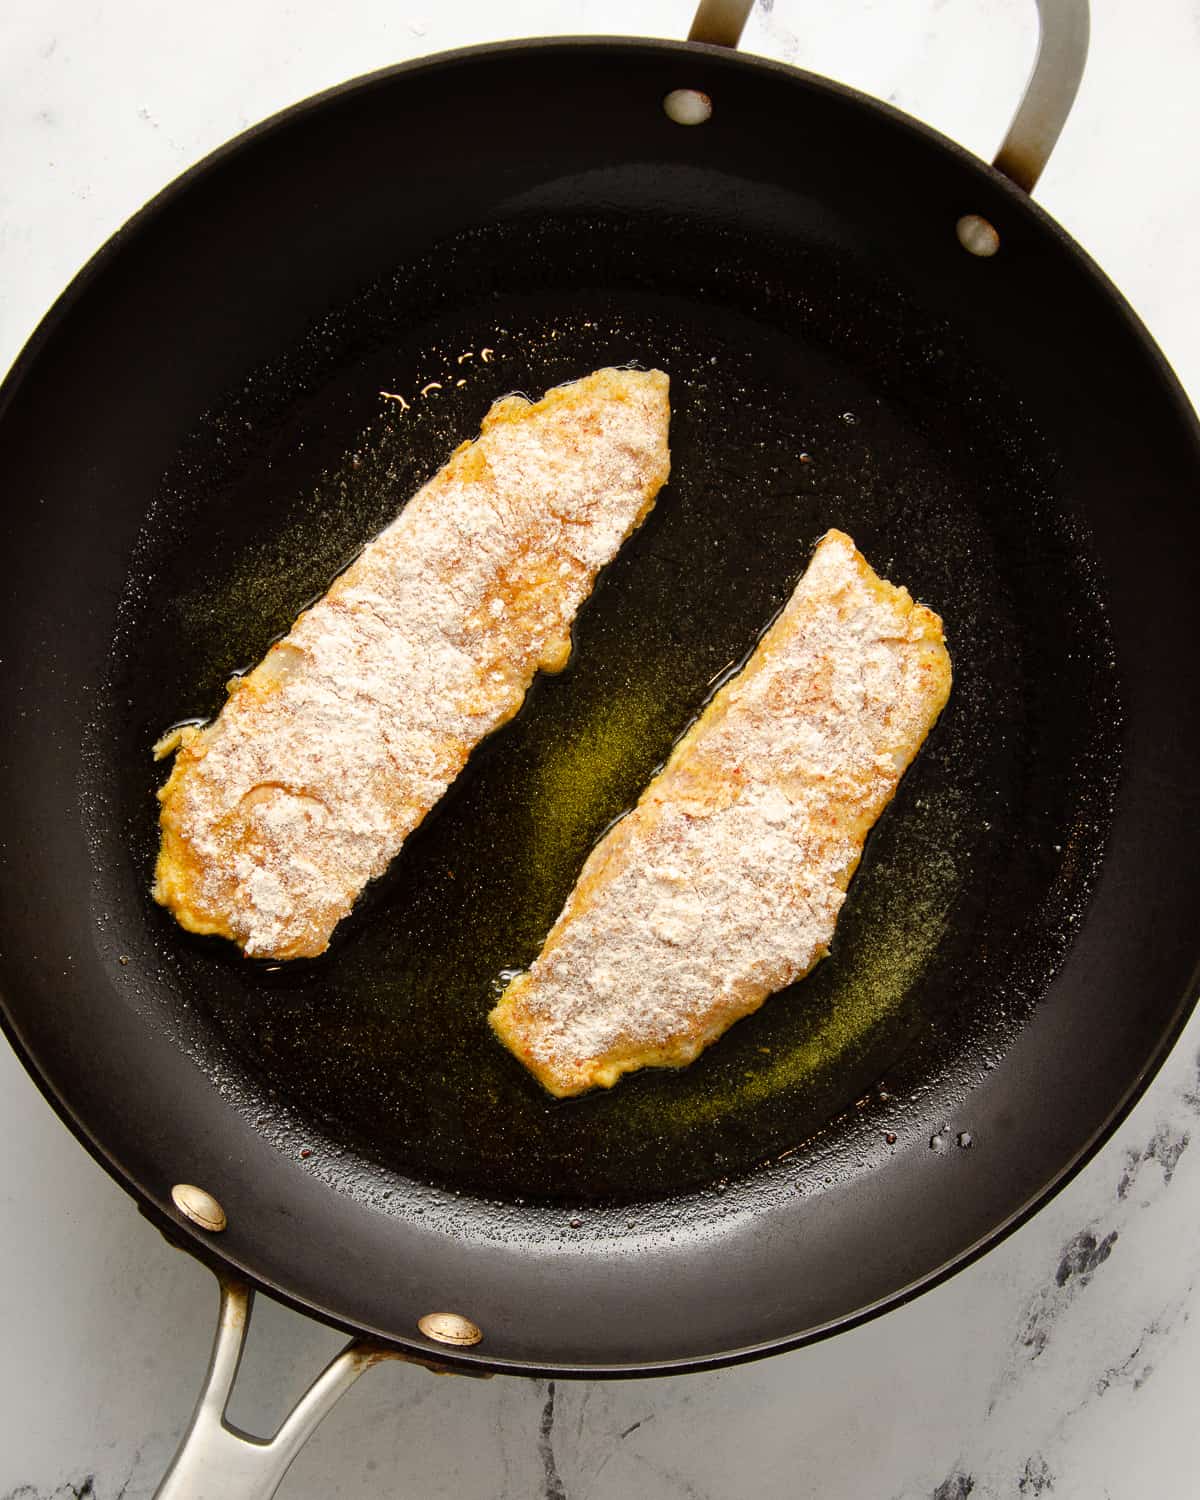 Two pieces of tilapia frying in a frying pan.